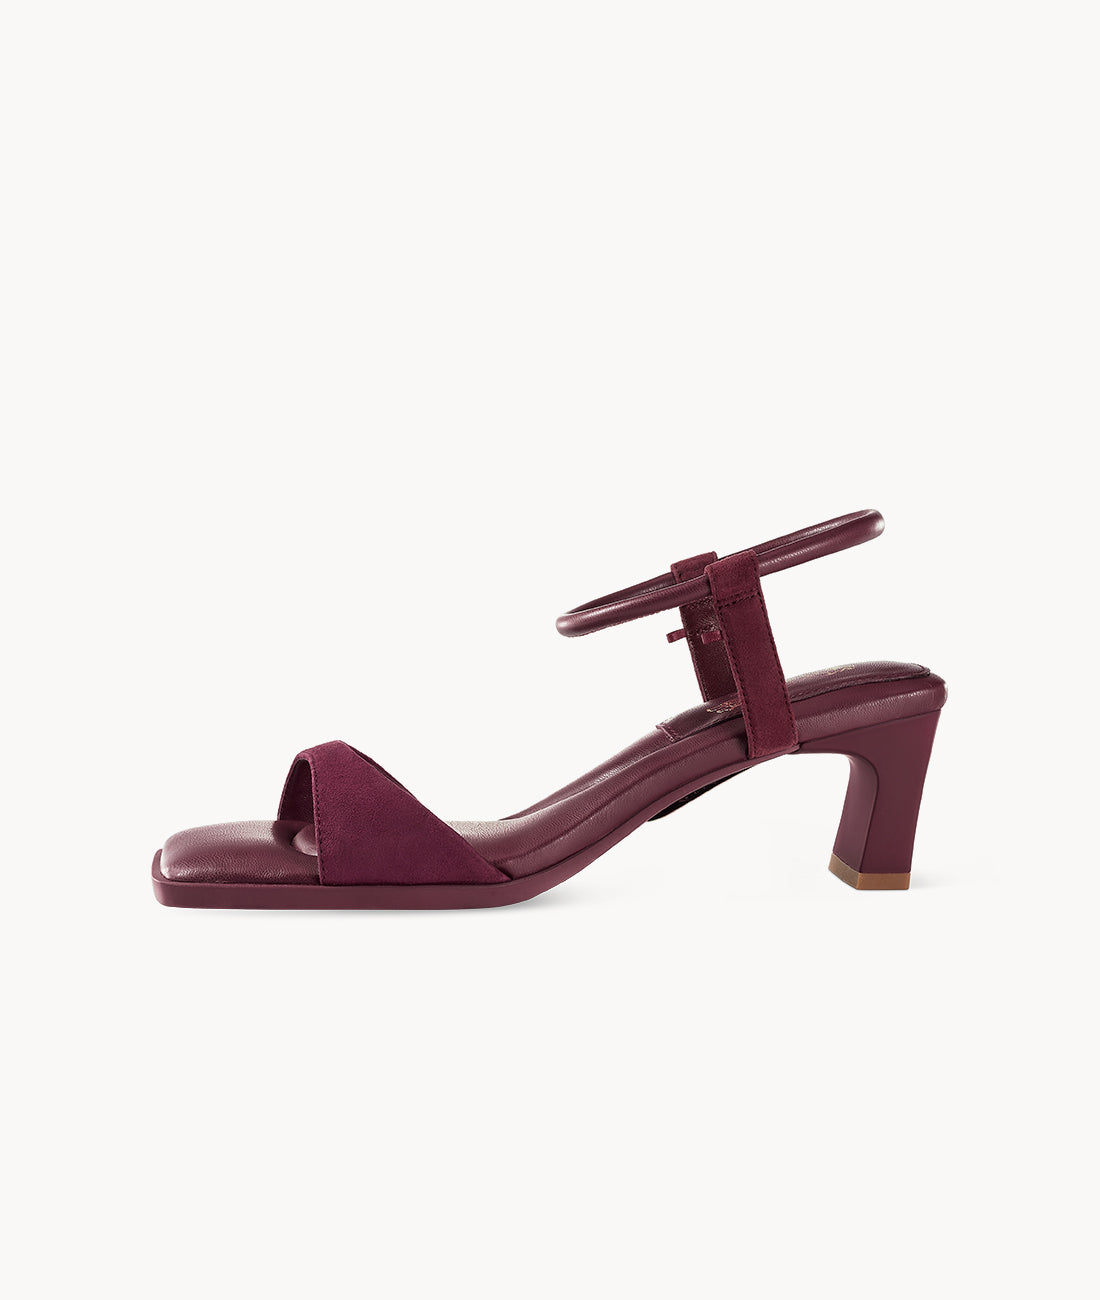 7or9 5cm red Sofas Sandals-Roselle Sandals 7or9